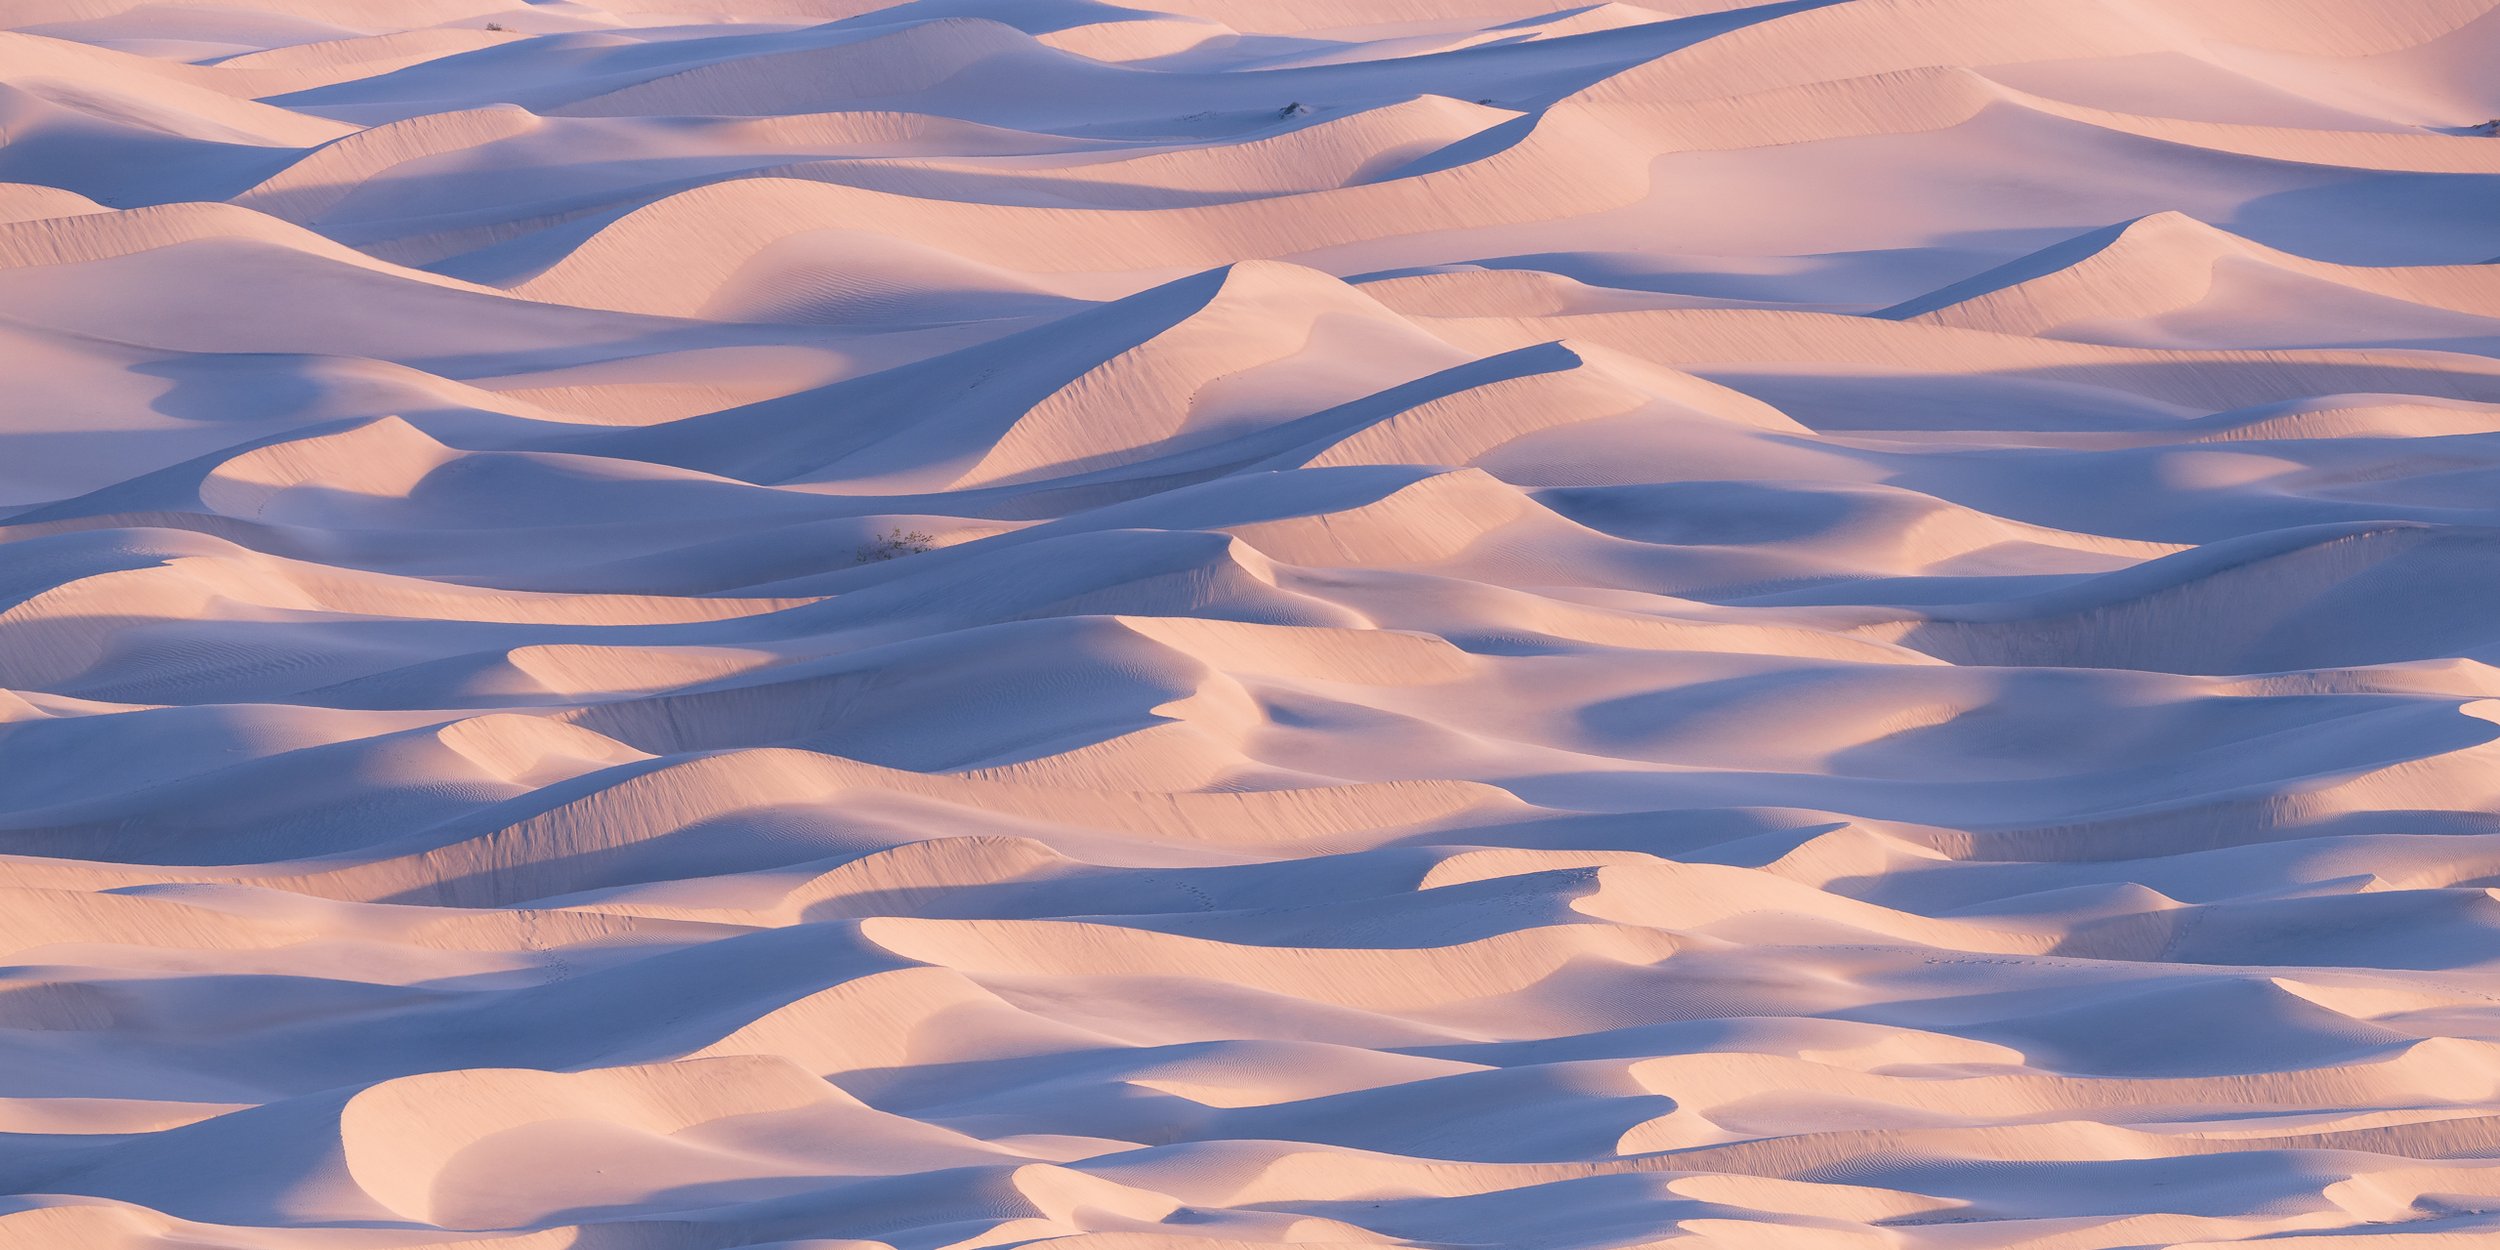 Dawn on the dunes- Death Valley, CA